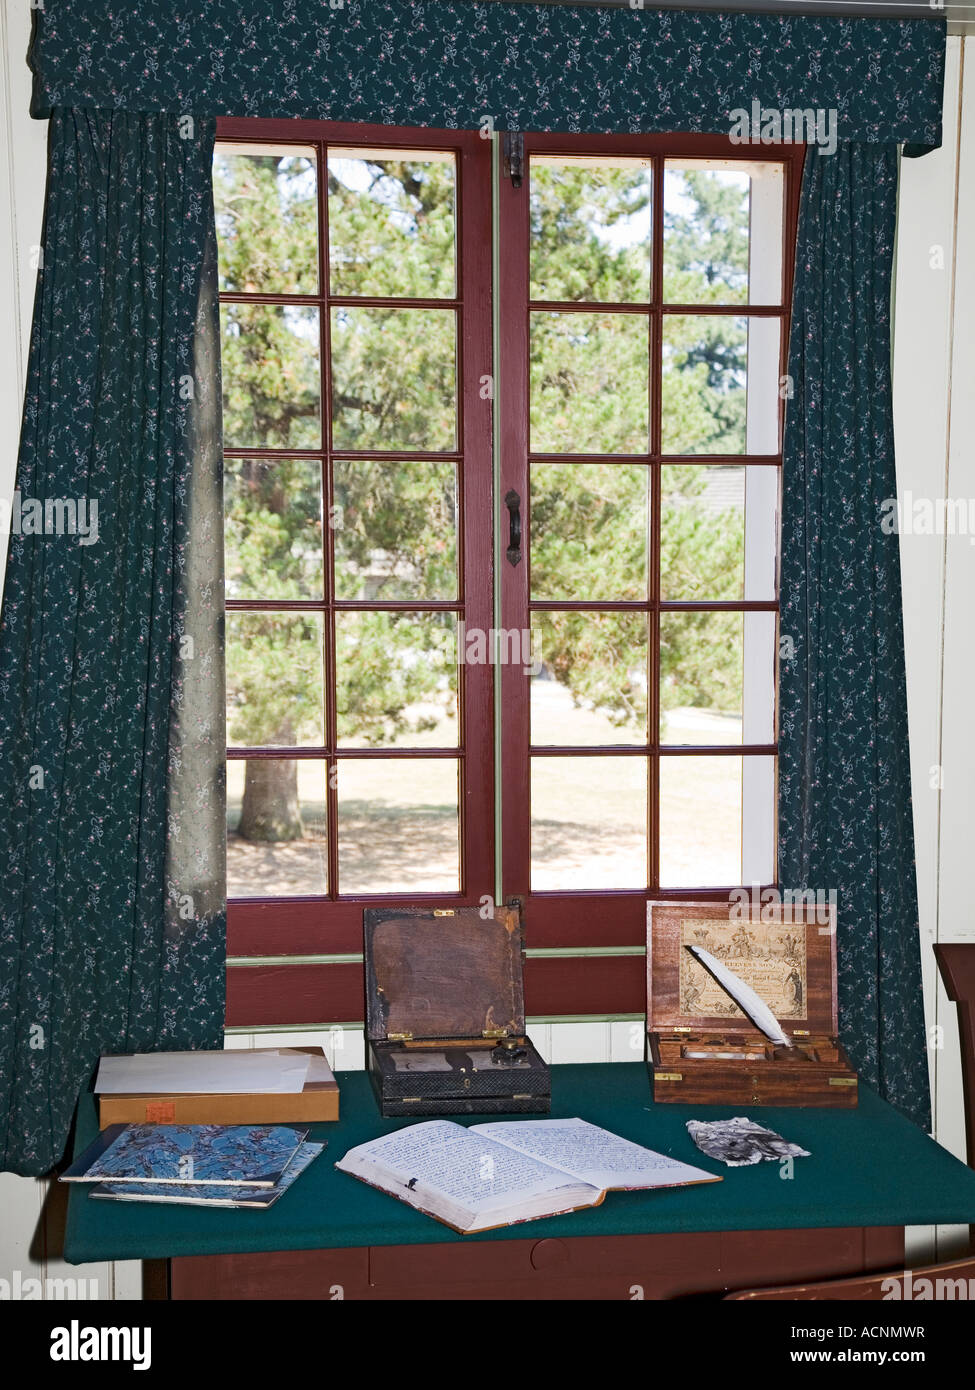 Writing journal and quill pen on table in front of window Fort Langley Canada Stock Photo